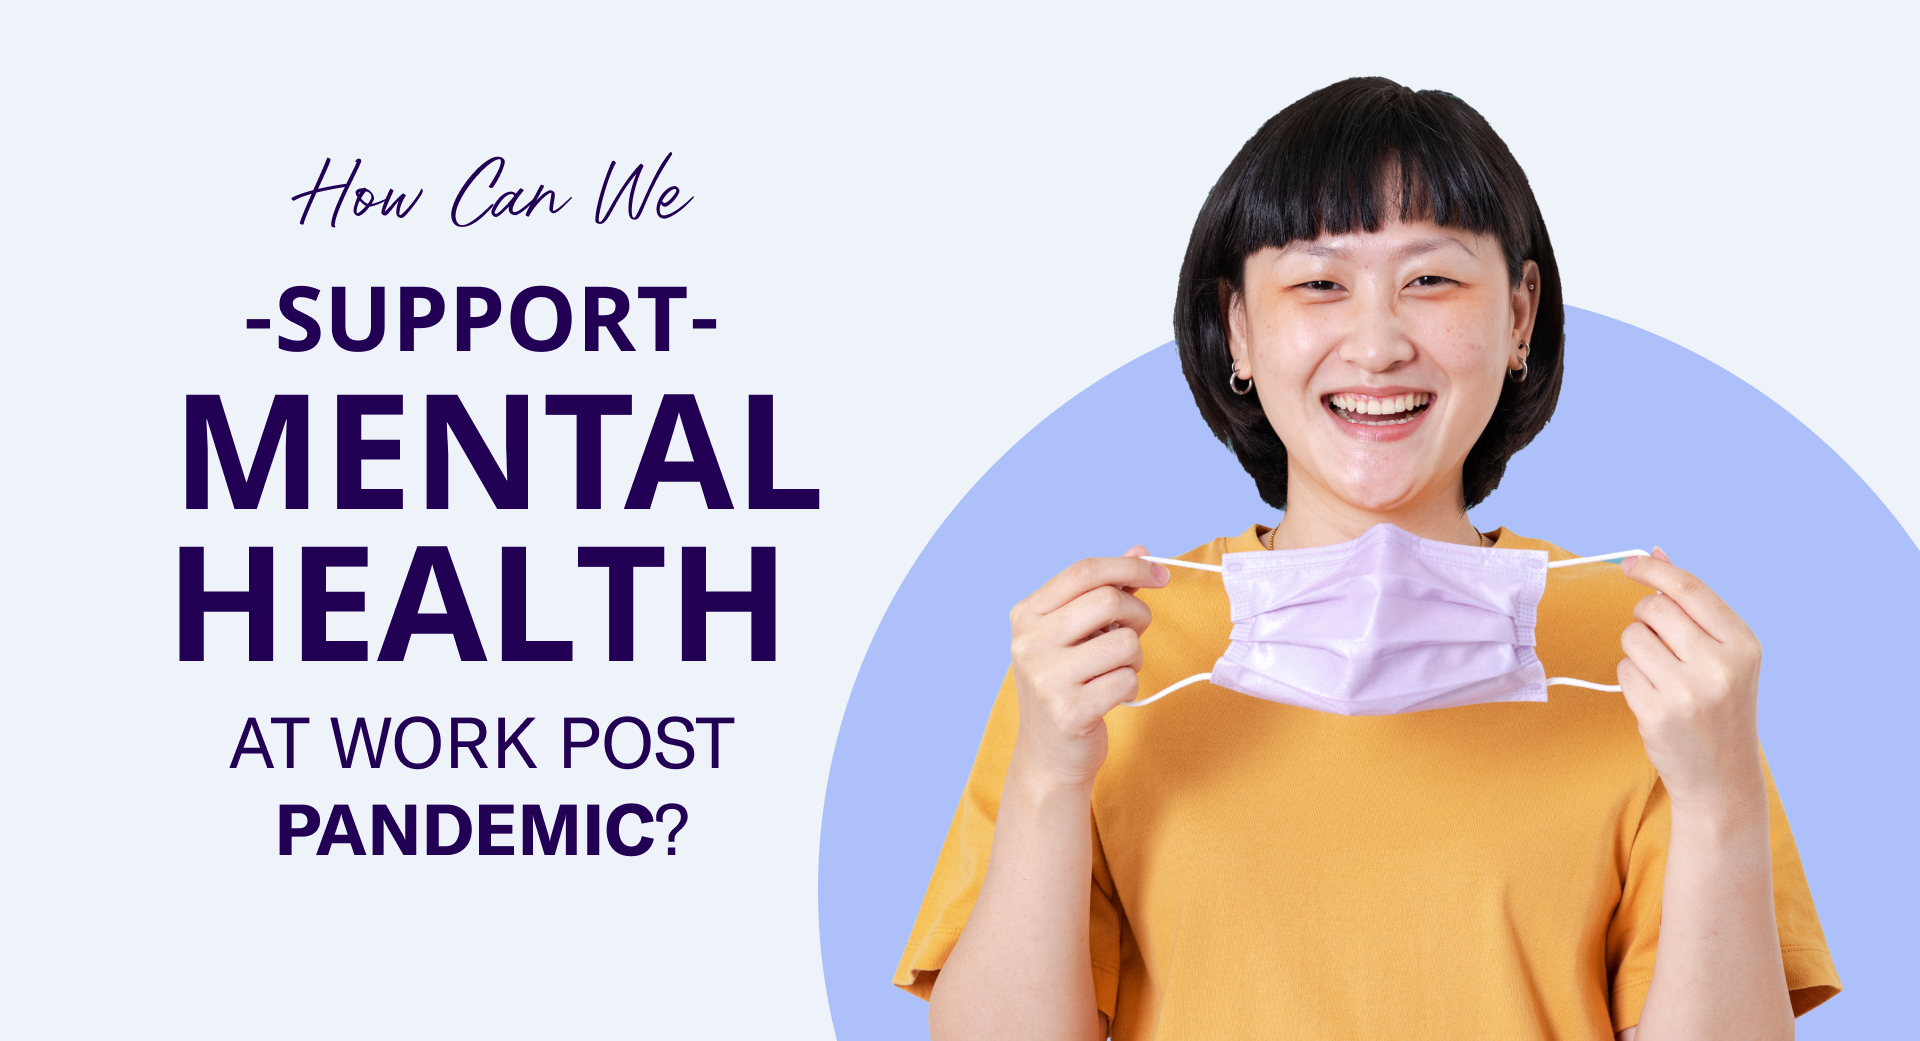 We-Support-Mental-Health-at-Work-Post-Pandemic